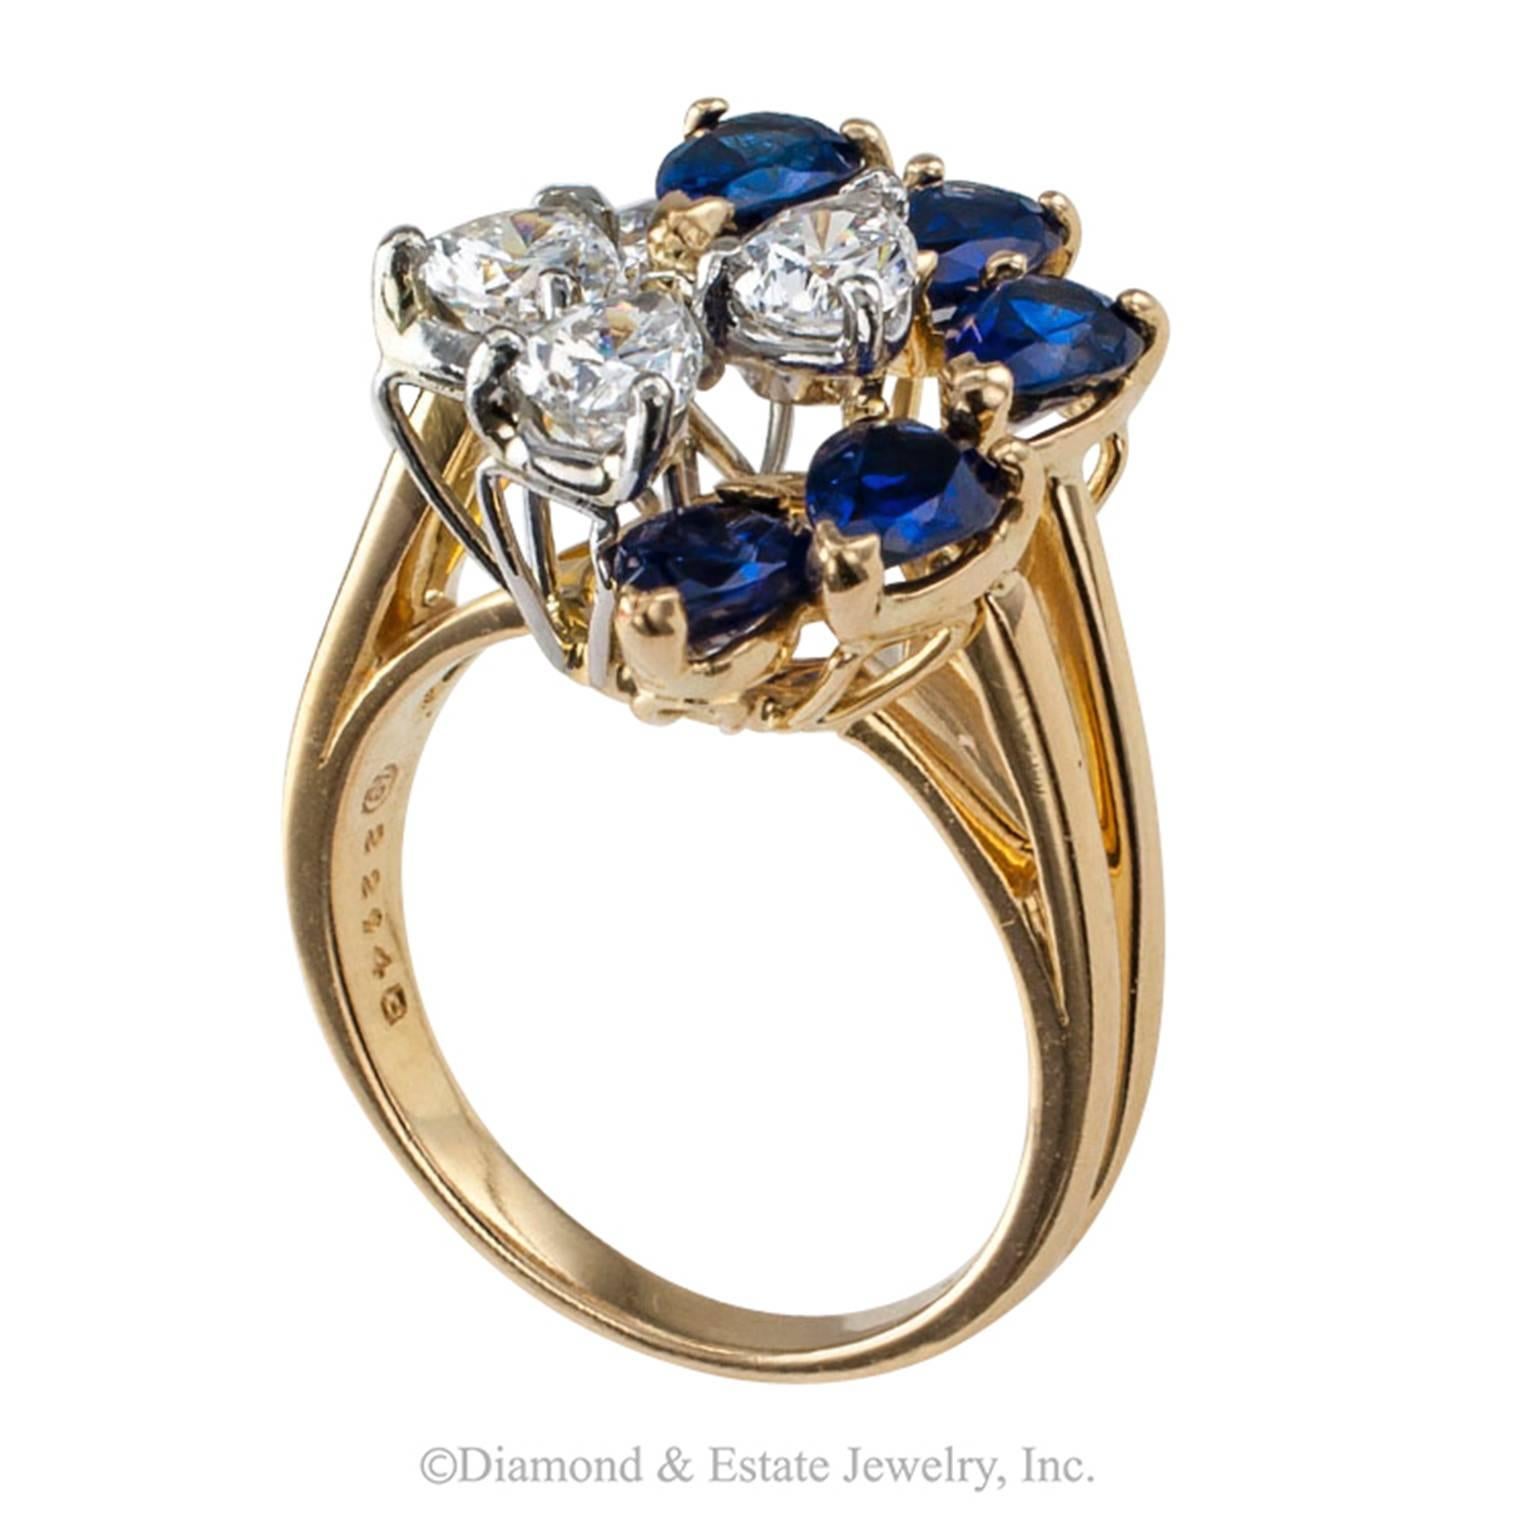 Oscar Heyman Sapphire and Diamond Cocktail Ring

 Oscar Heyman diamond and sapphire cocktail ring, circa 1970.  A dramatic arrangement of five pear-shaped diamonds set in platinum and five similarly cut sapphires set in 18-karat yellow gold lend